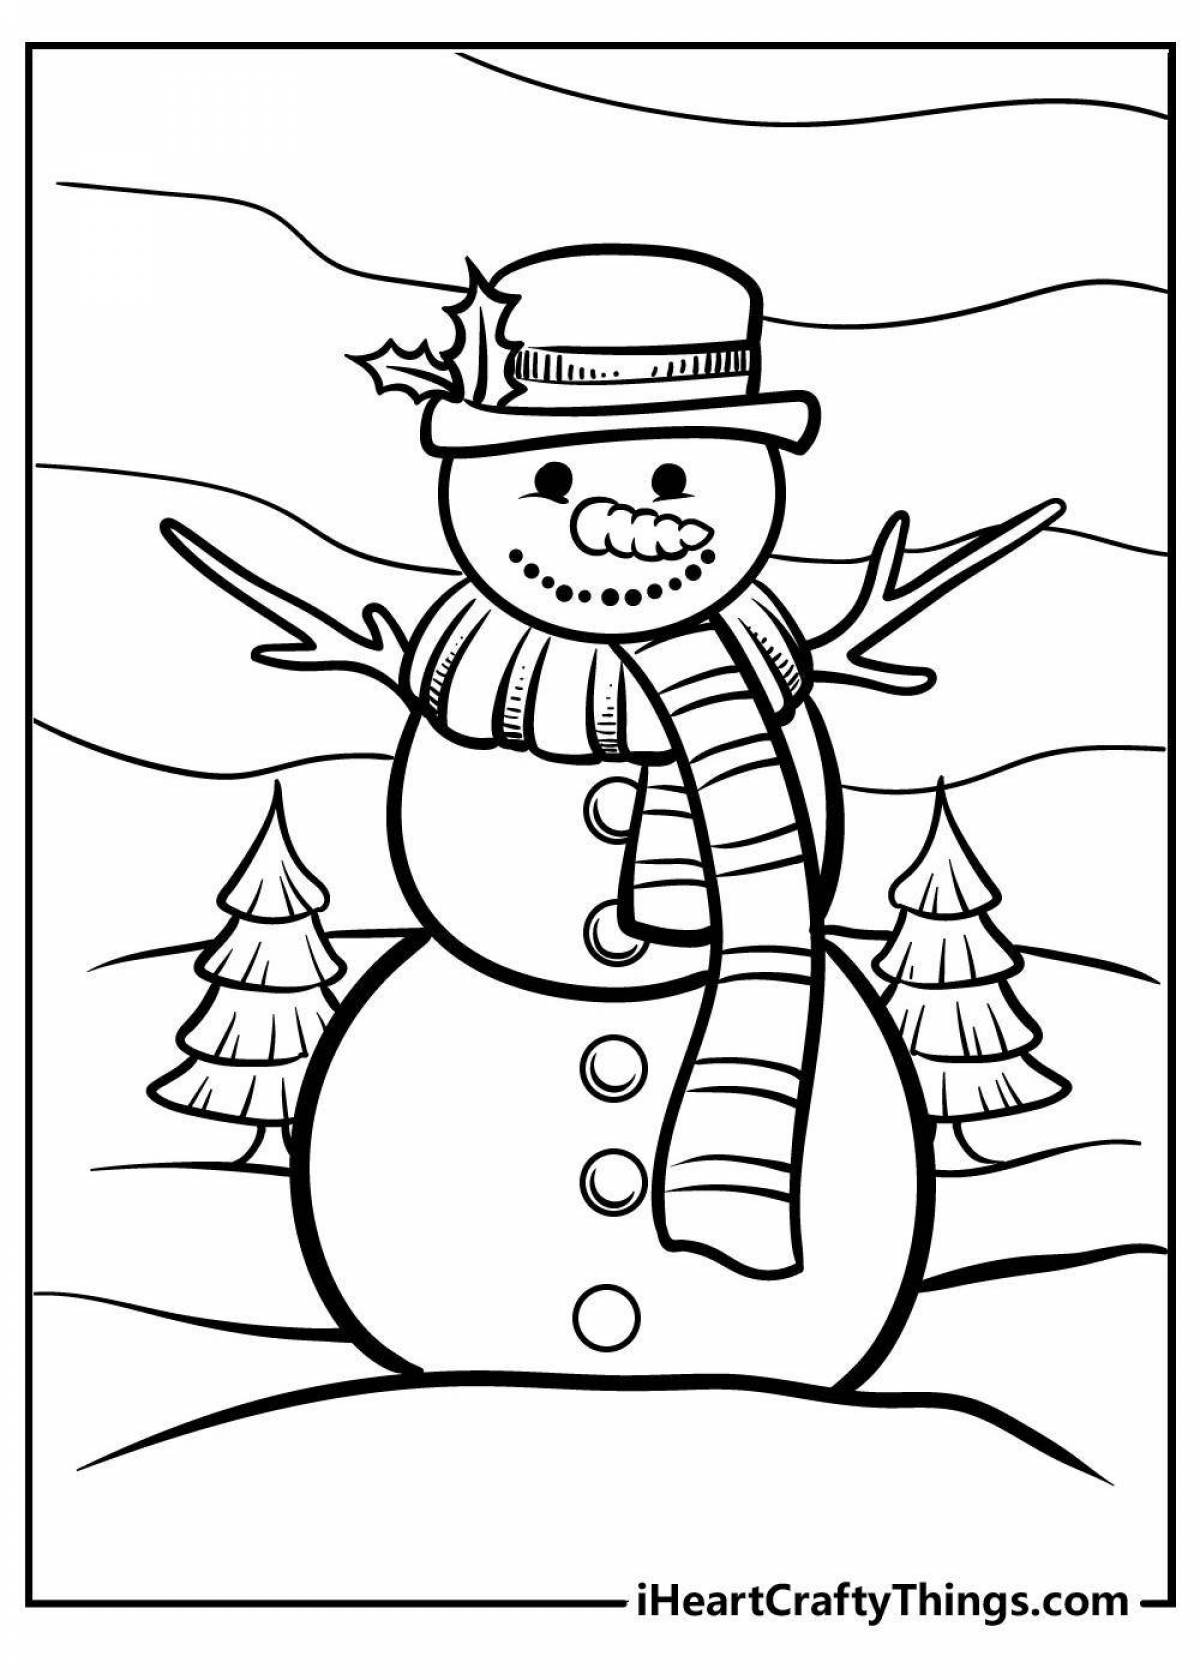 Cute snowman coloring book for kids 5 6